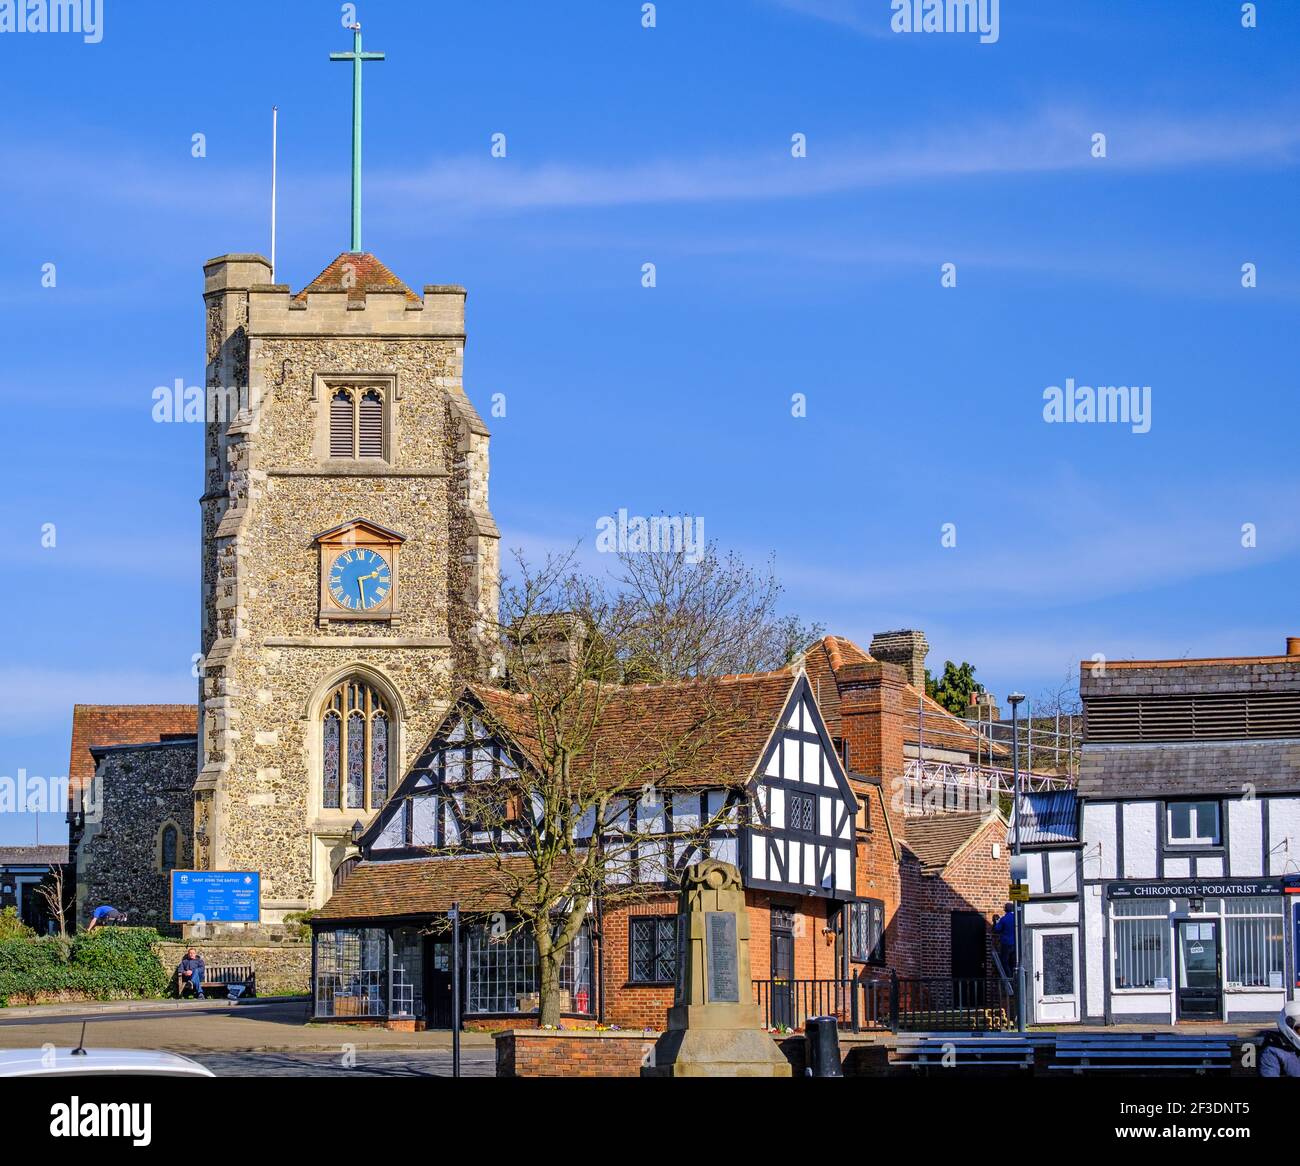 Pinner Village high street with medieval hilltop church St John the Baptist, war memorial & historic half-timbered buildings. NW London, England Stock Photo